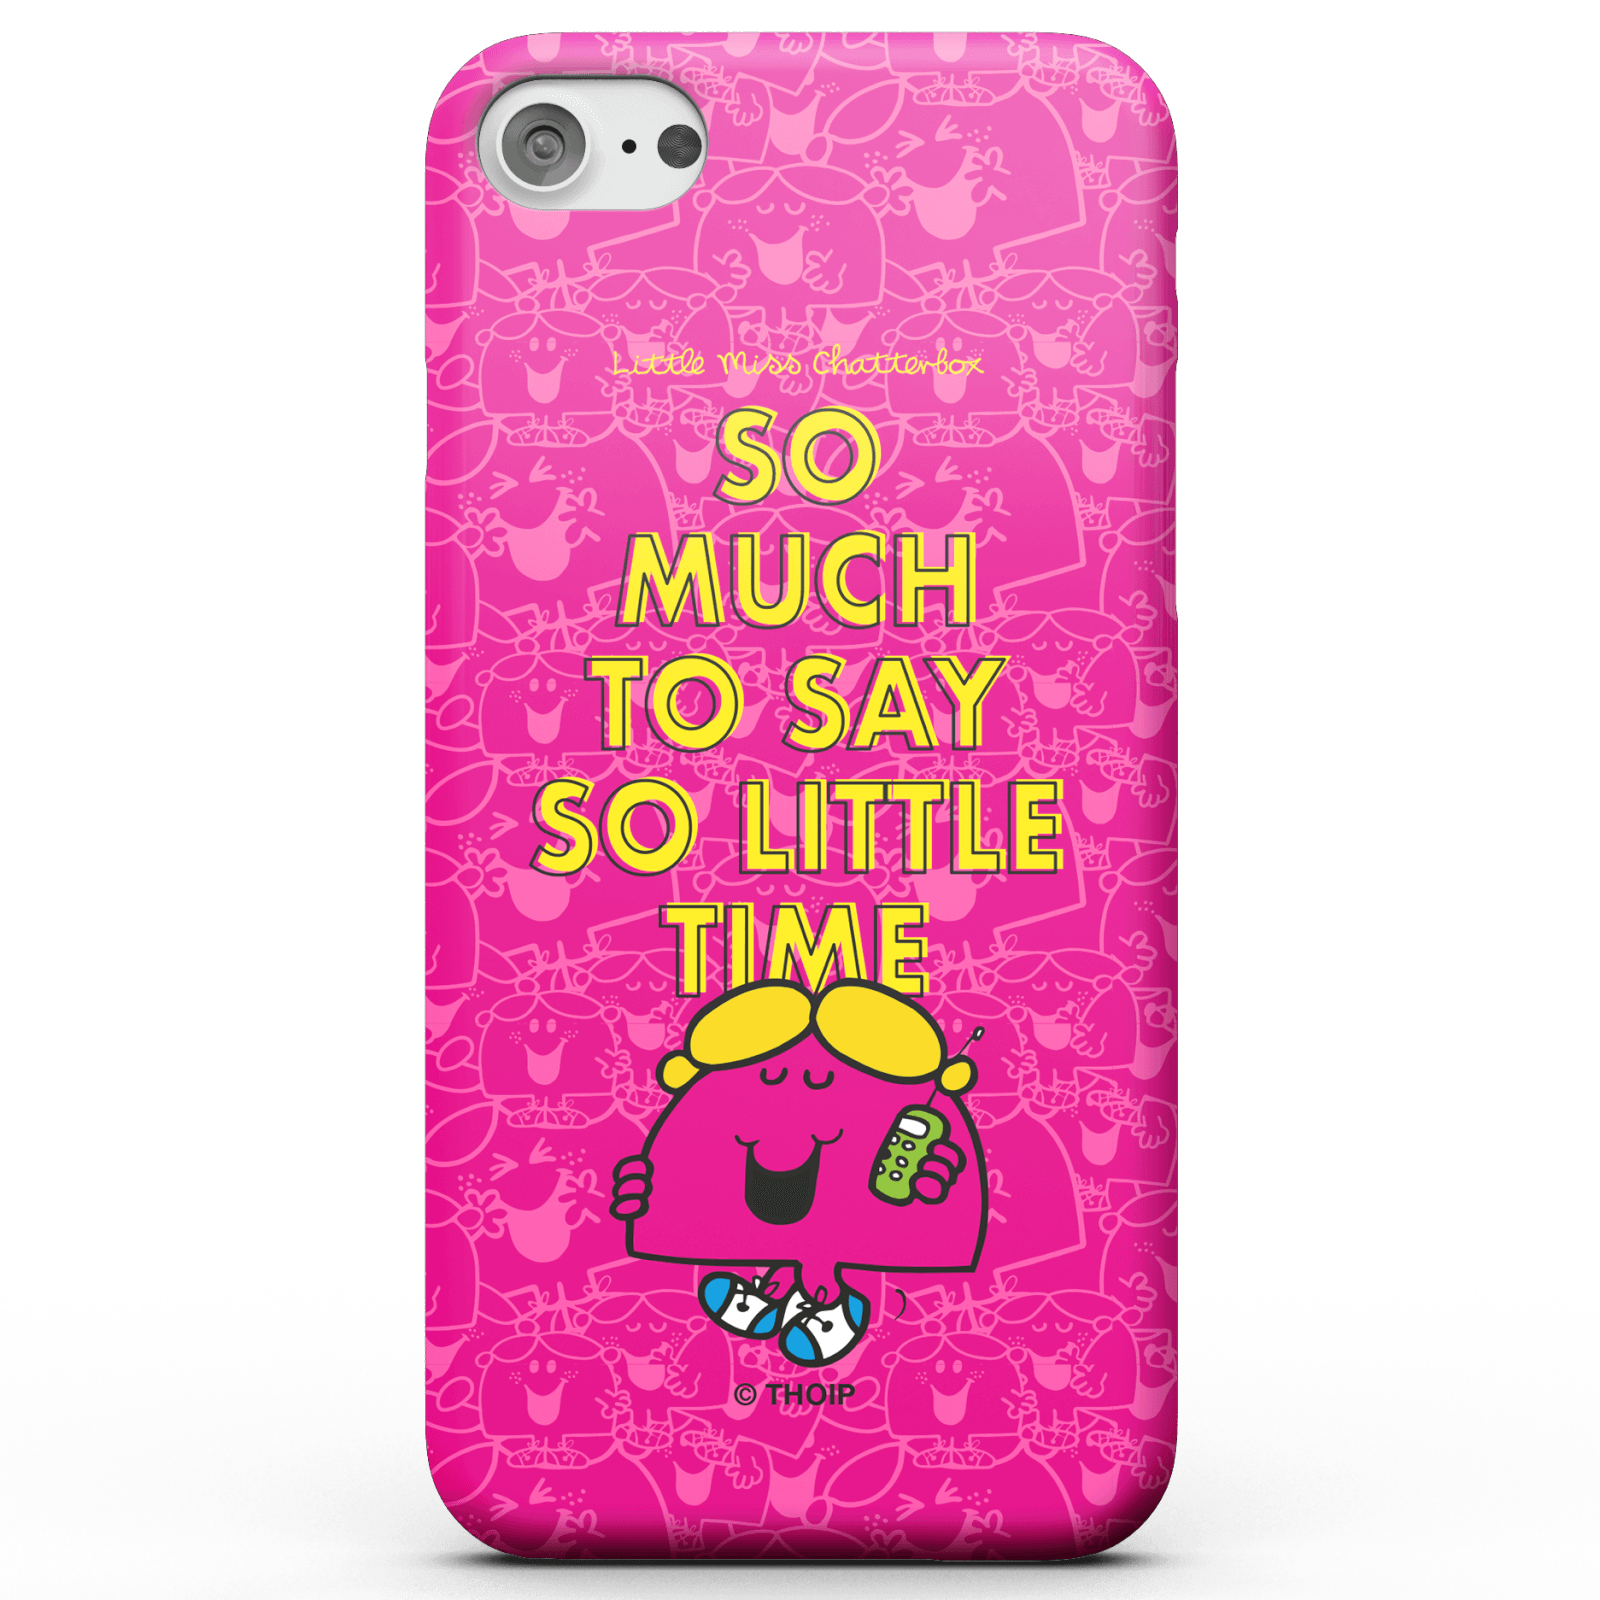 Mr Men & Little Miss Little Miss Chatterbox So Much To Say So Little Time Phone Case for iPhone and Android - iPhone 5/5s - Snap Case - Matte